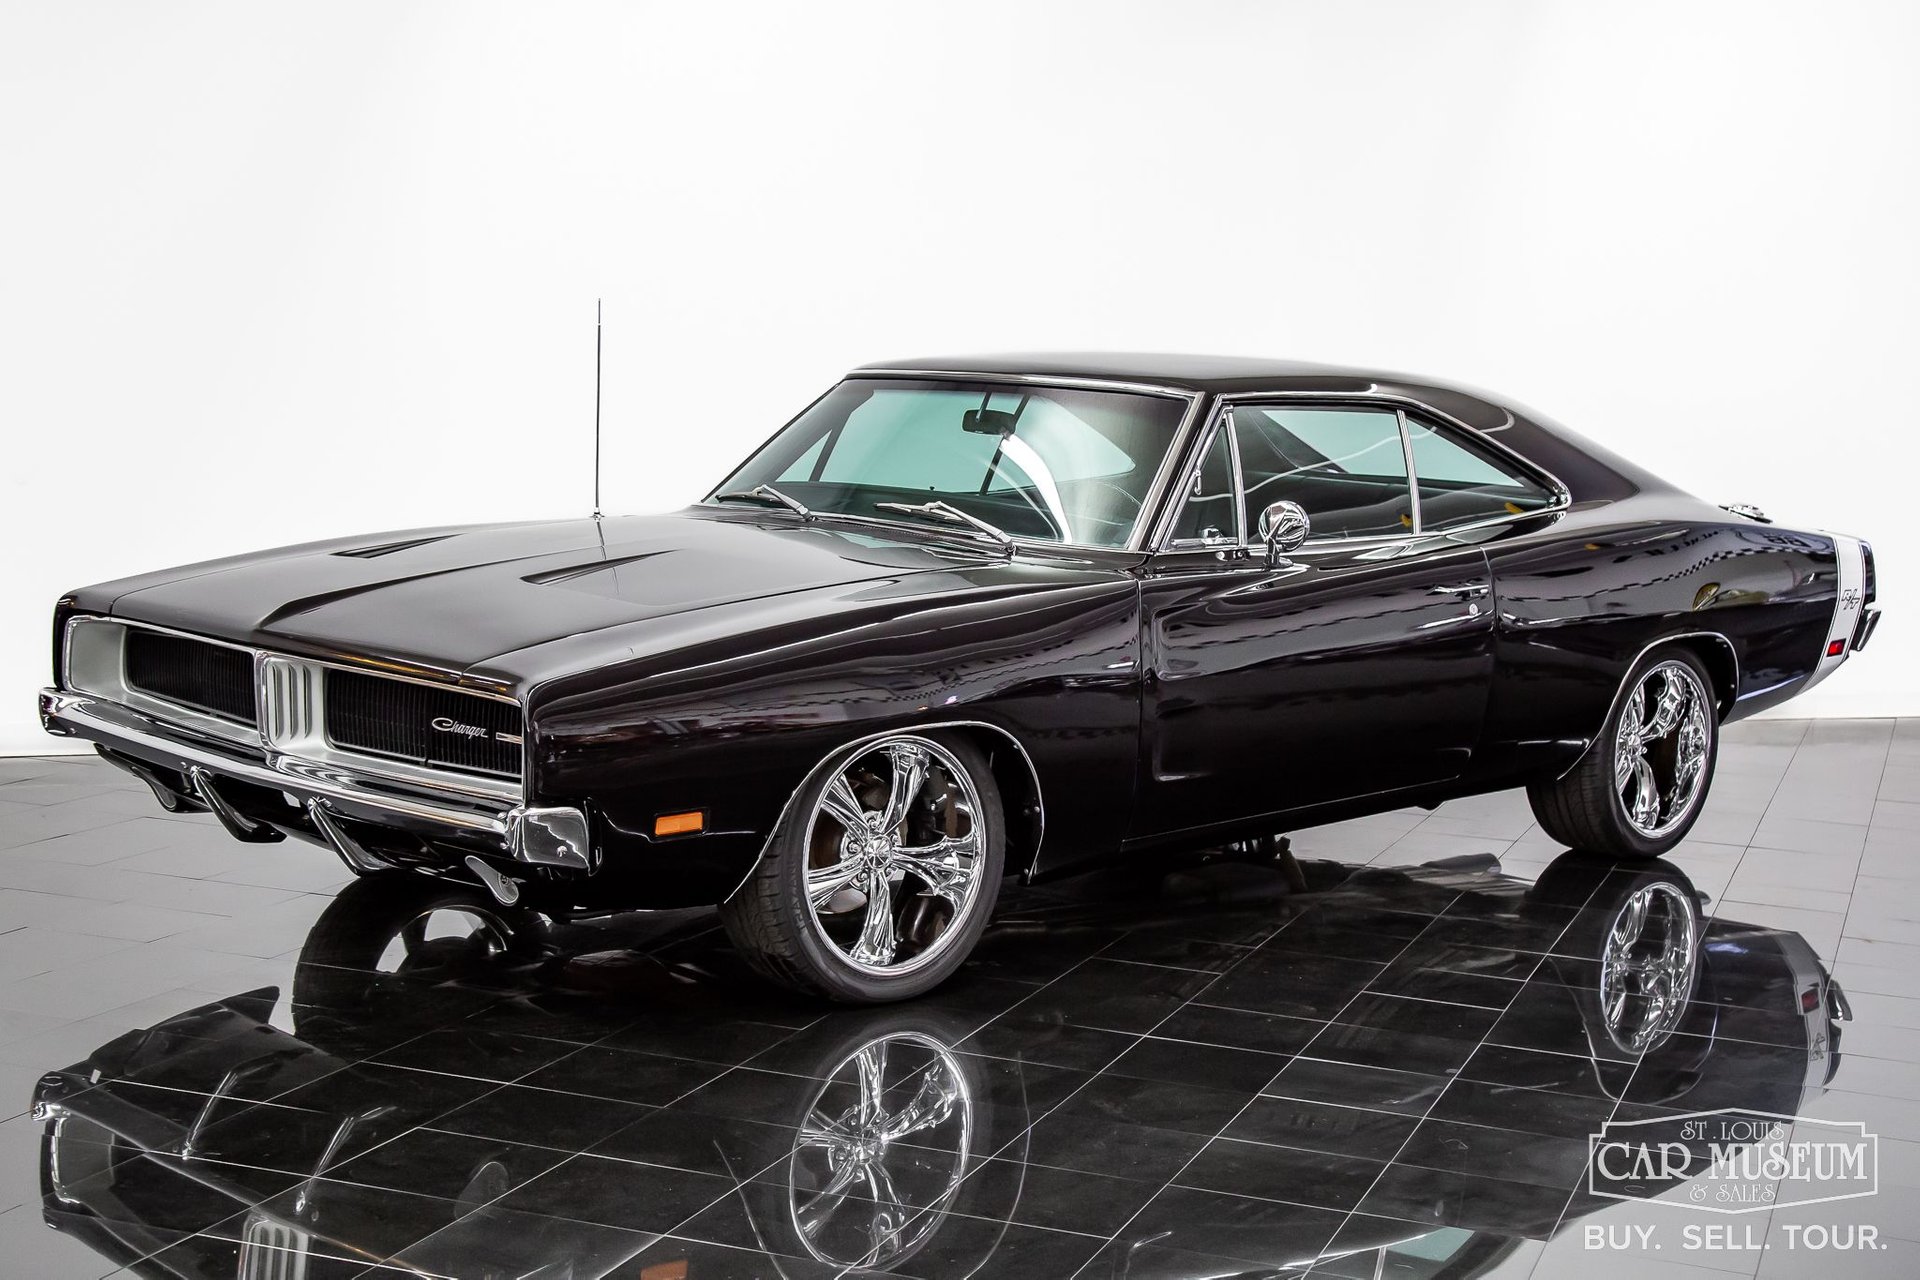 1969 Dodge Charger For Sale | St. Louis Car Museum